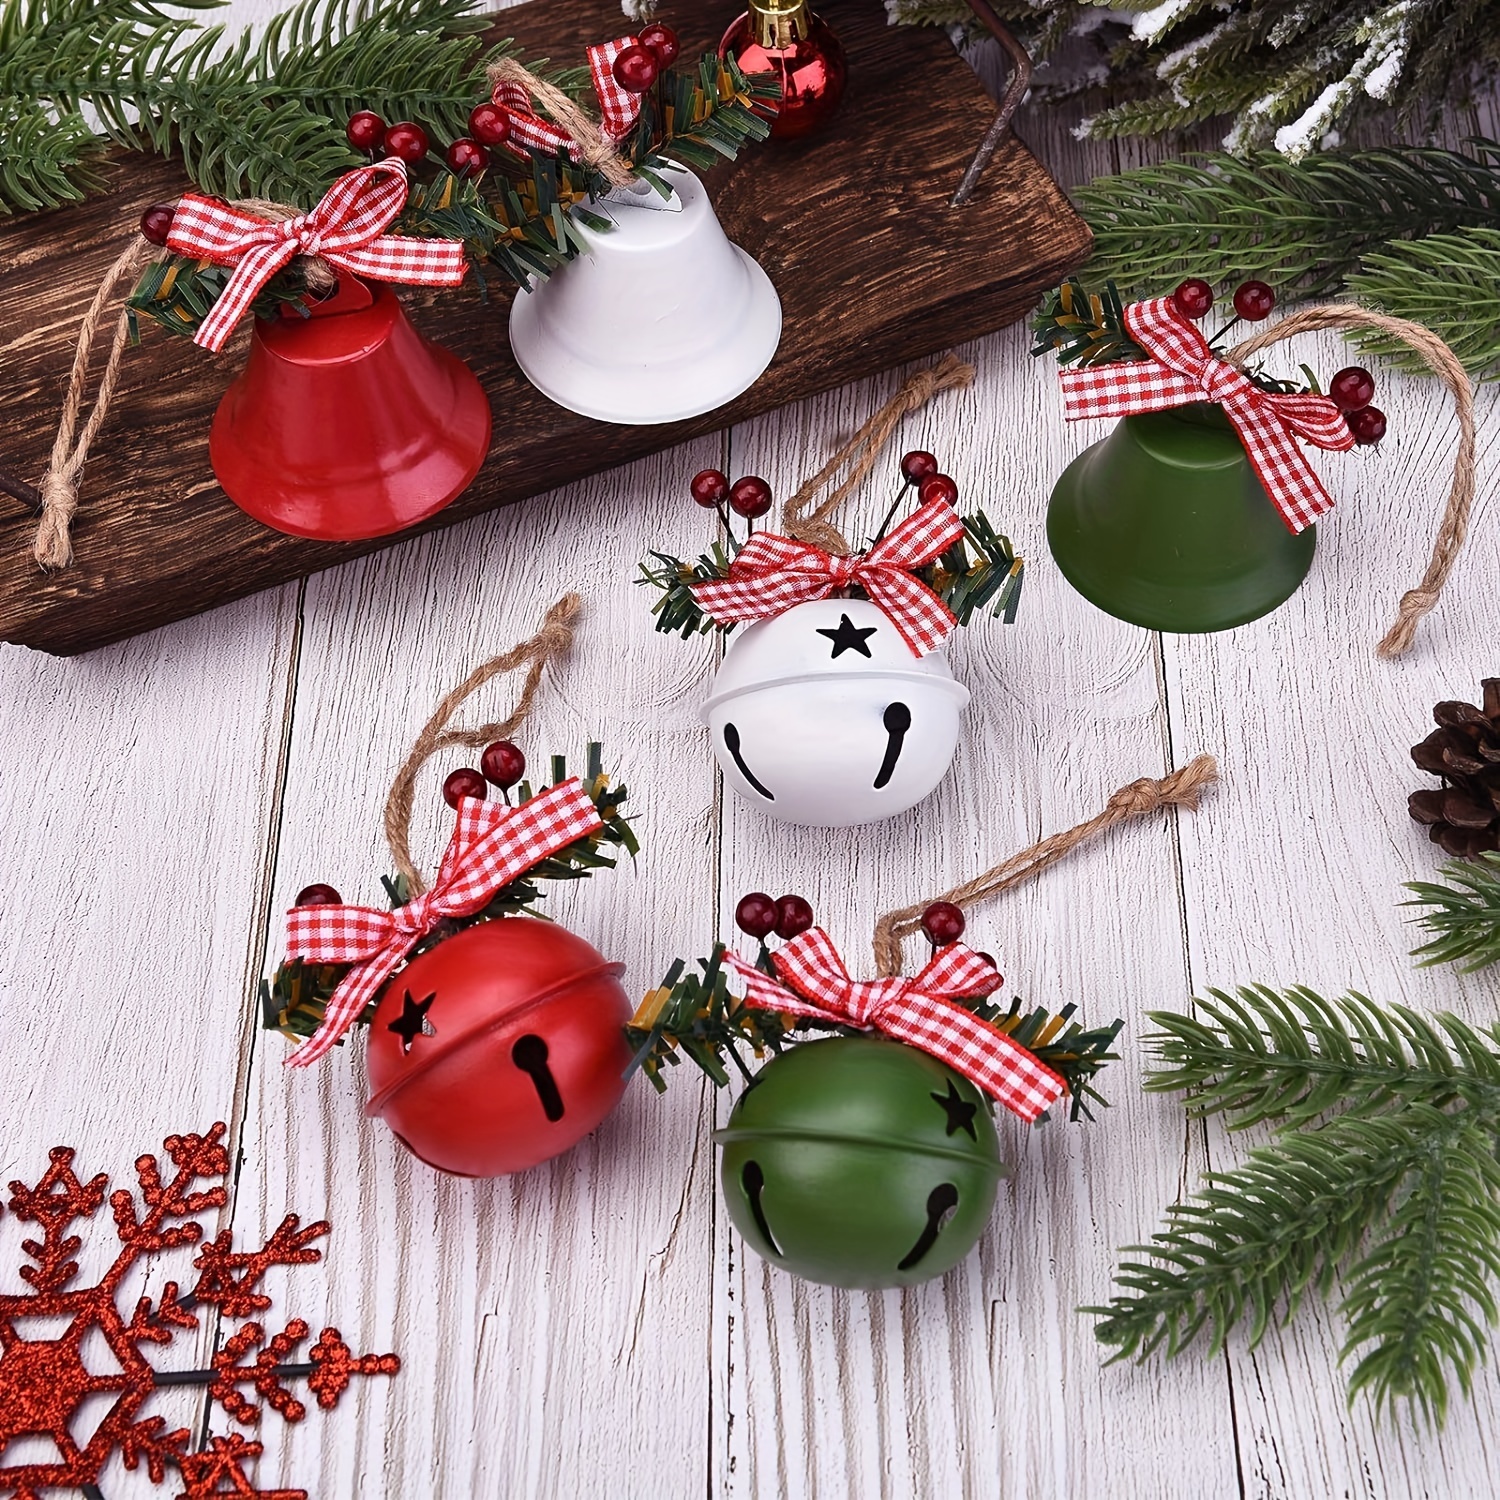 Merry Christmas Tree Jingle Bells Metallic Bell Ornament With Star Cutouts  Vintage Craft Bells For Wall